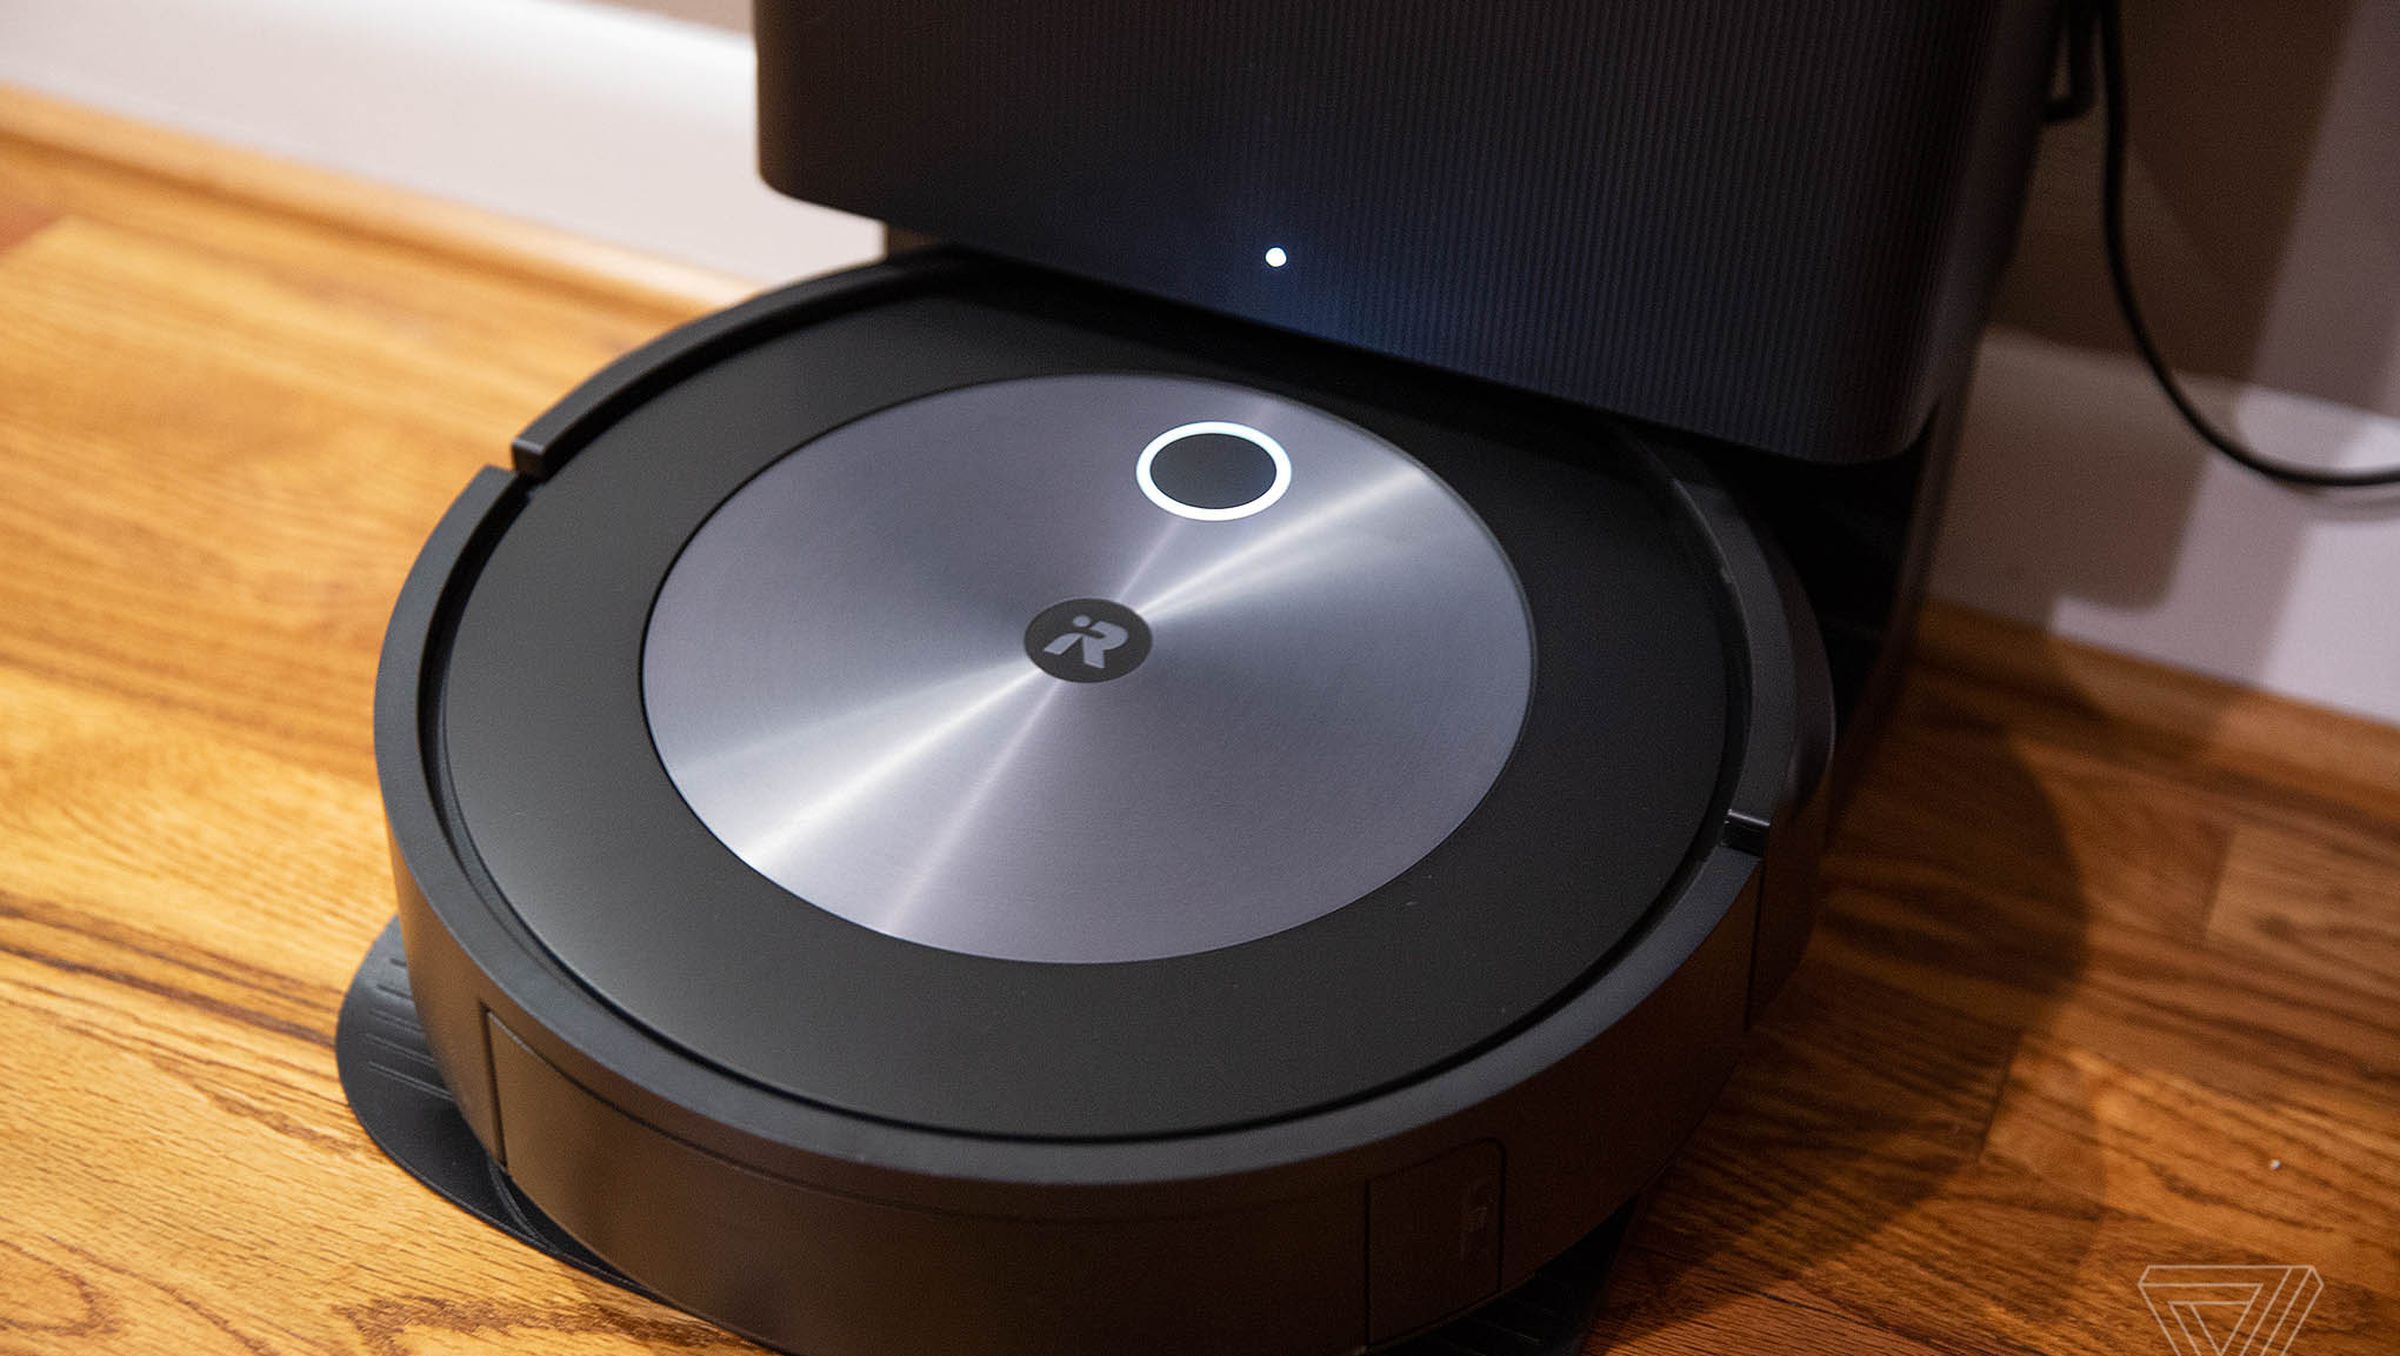 The iRobot Roomba j7 stands upright against the wall.